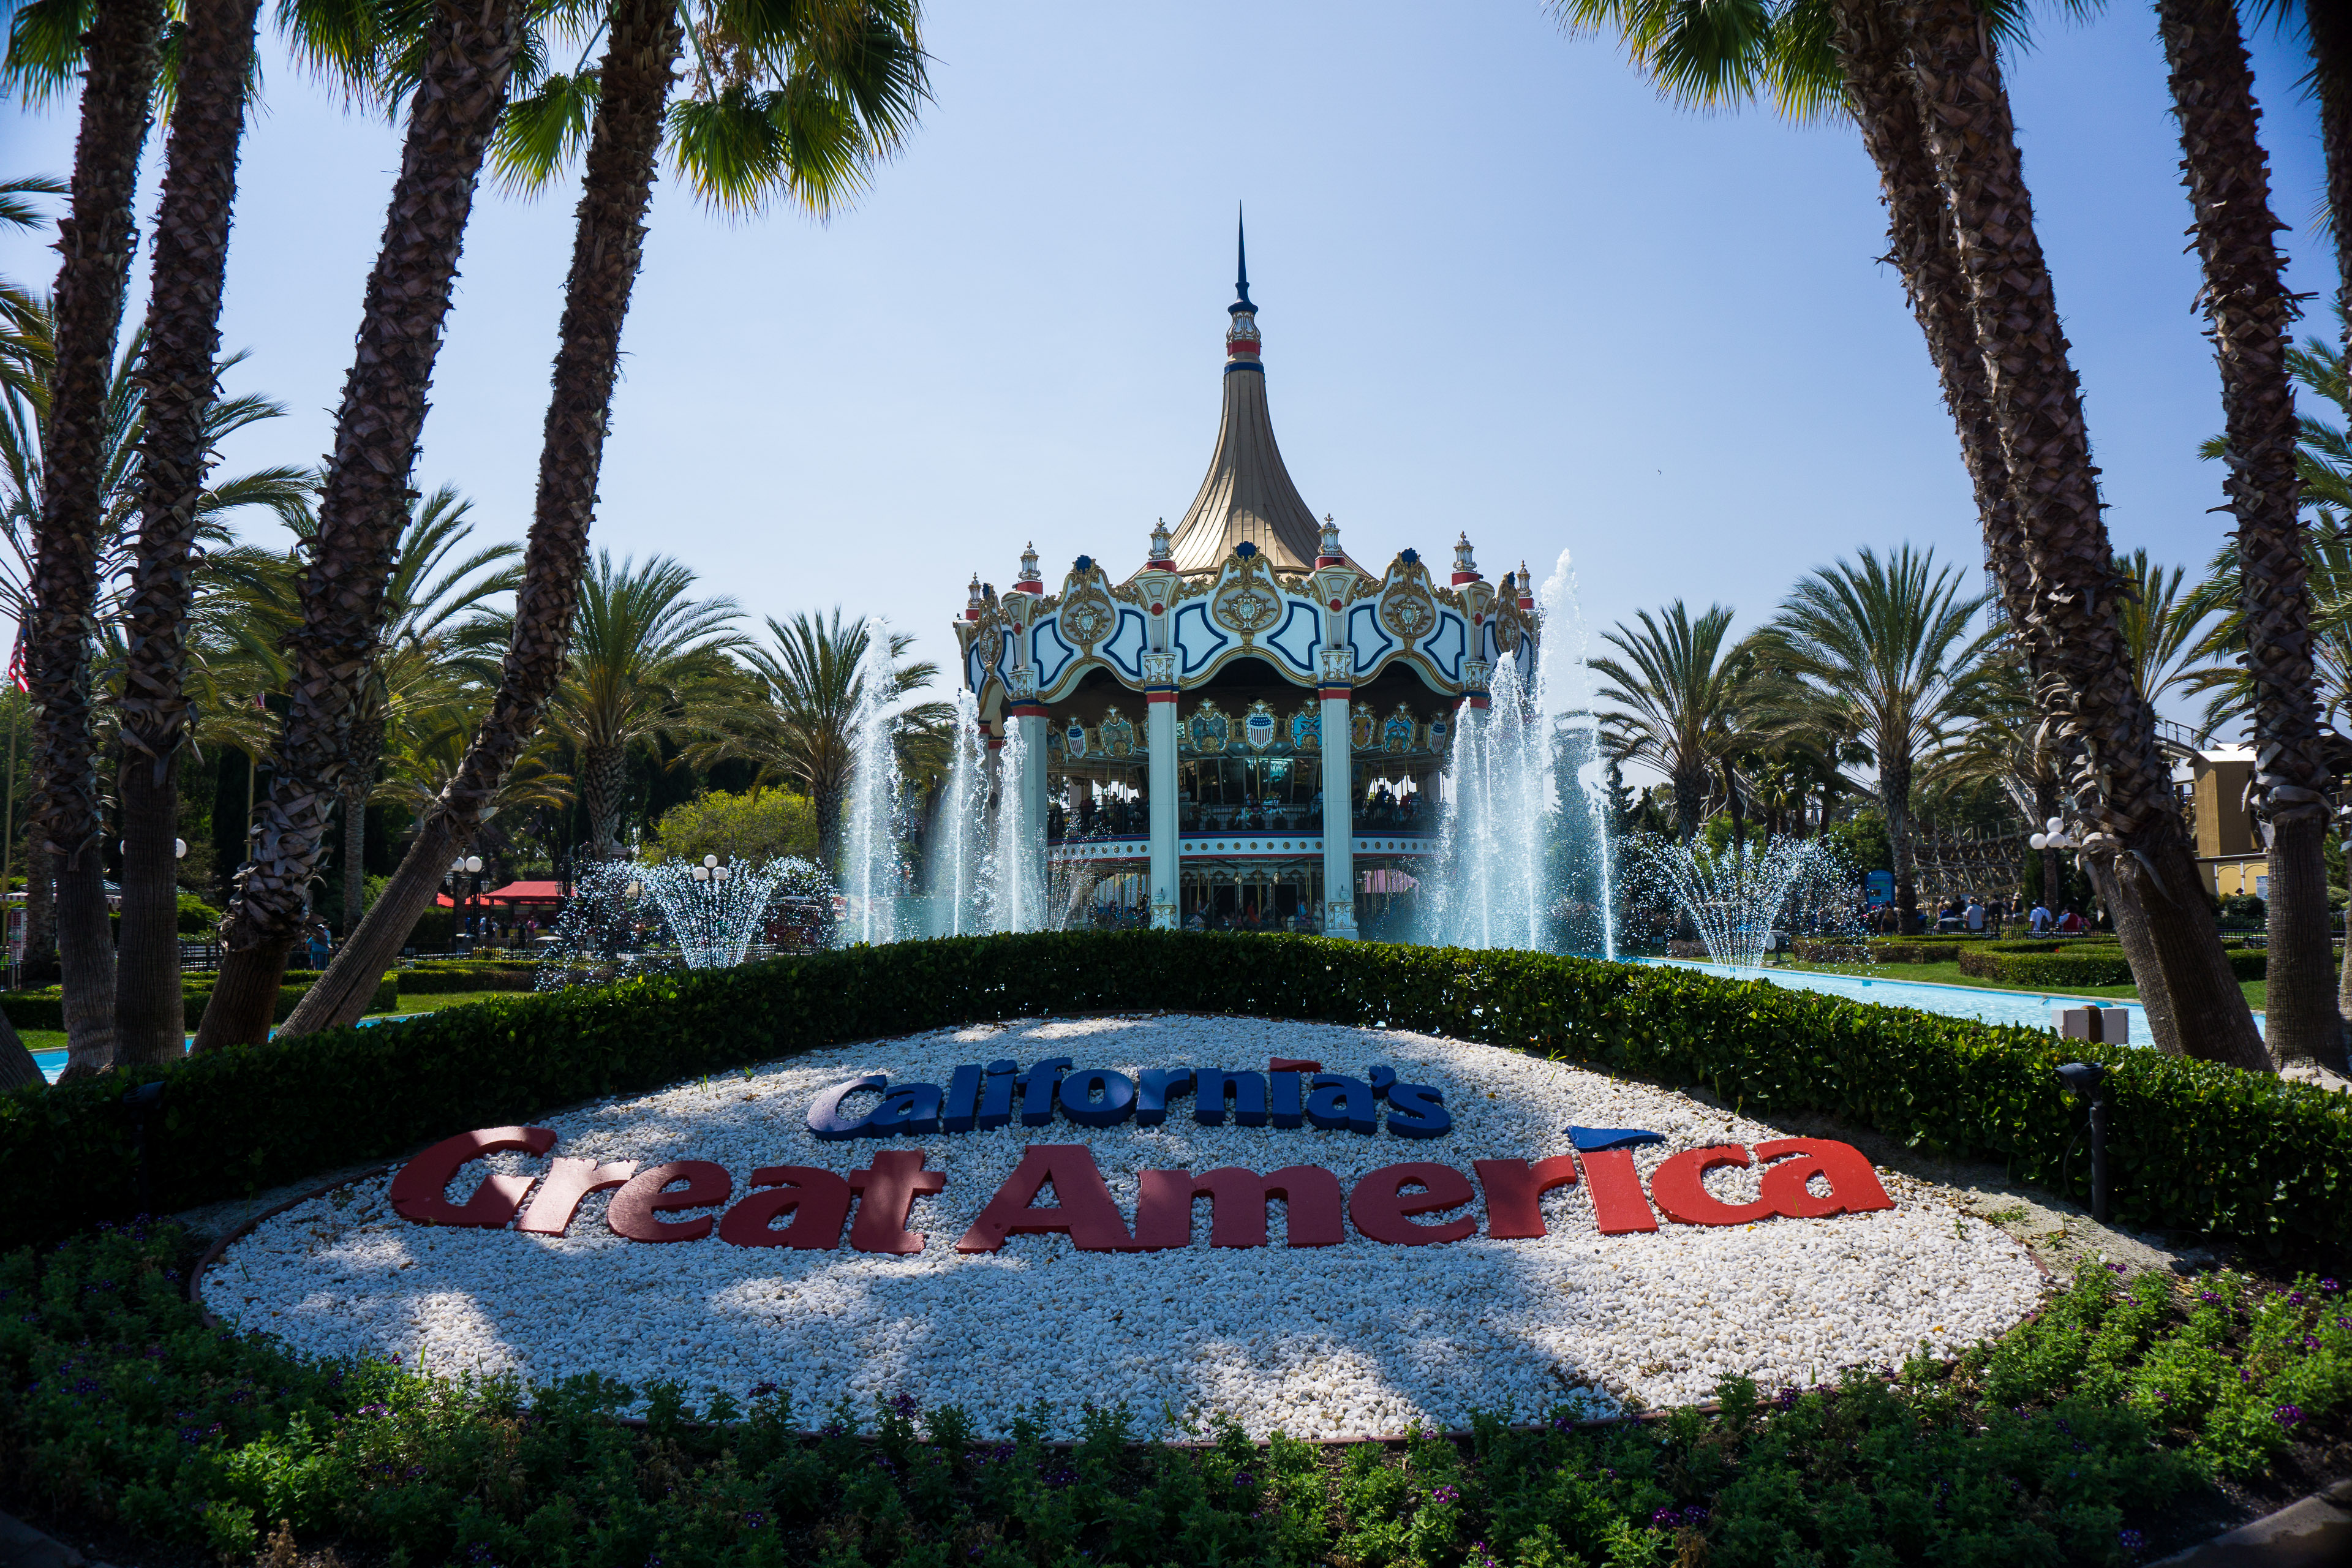 California's Great America Full Day of Thrills Guide